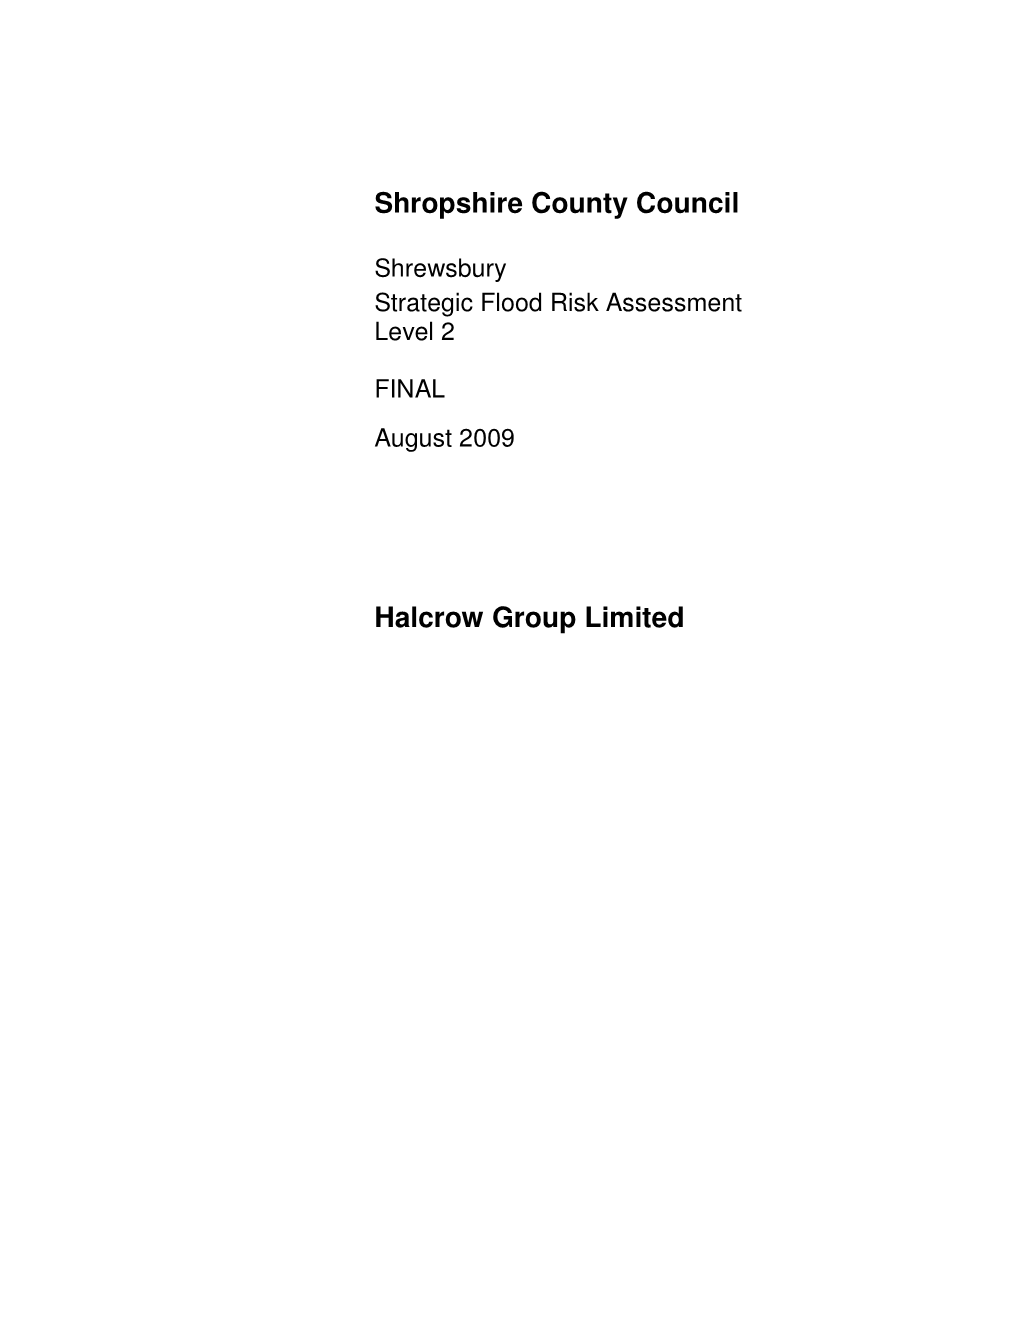 Shropshire County Council Halcrow Group Limited